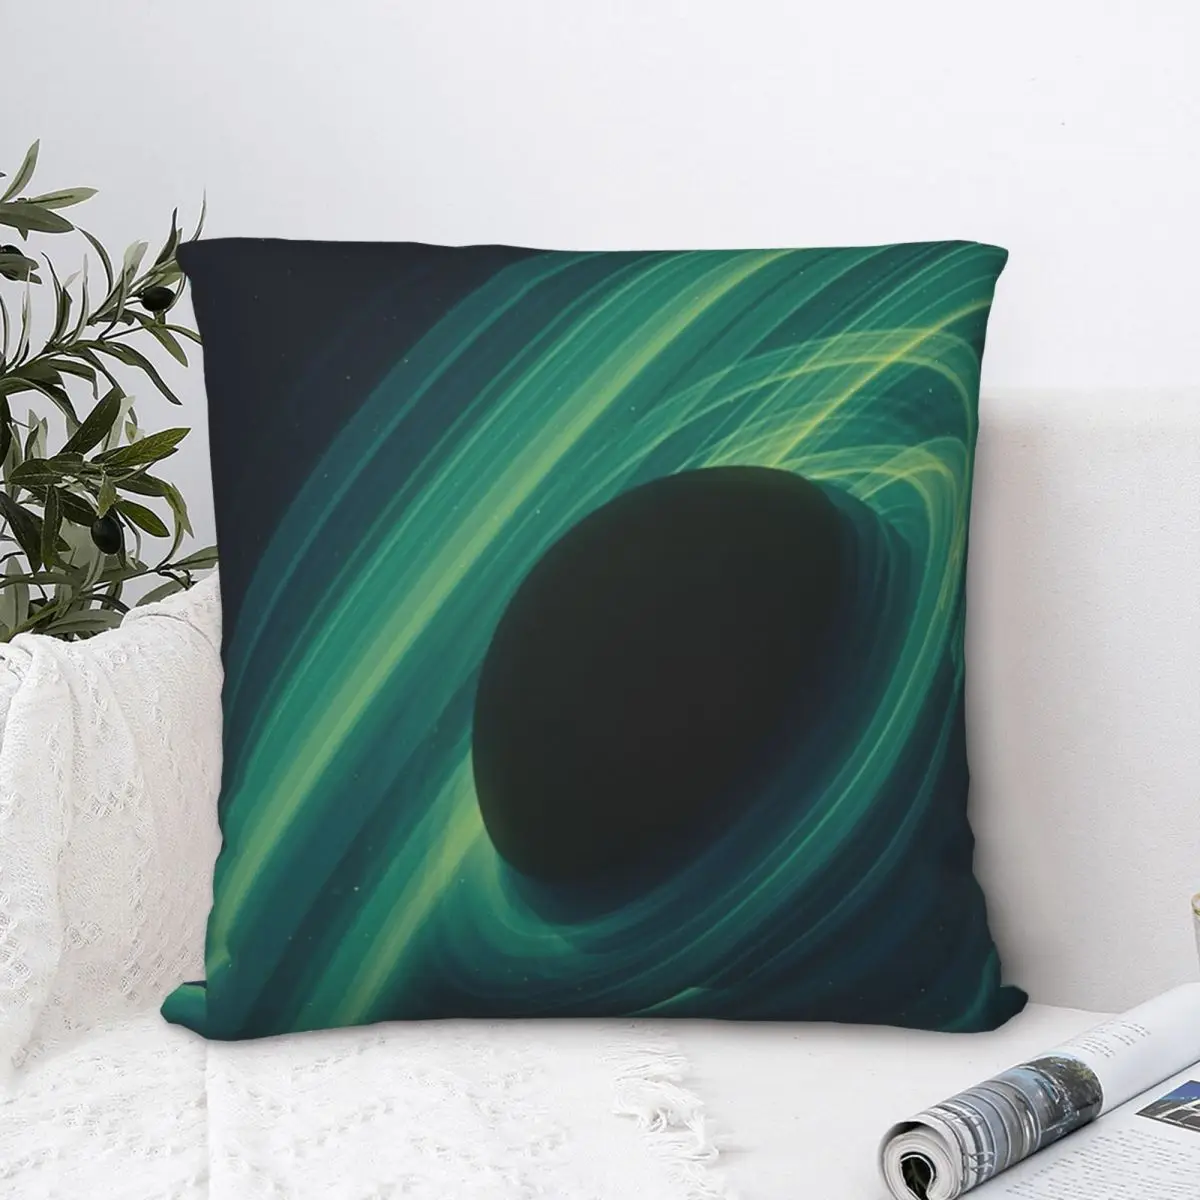 

Nebula Sci Fi Space Planet Black Holes Pillowcase Printing Polyester Cushion Cover Decor Throw Pillow Case Cover Square 45X45cm